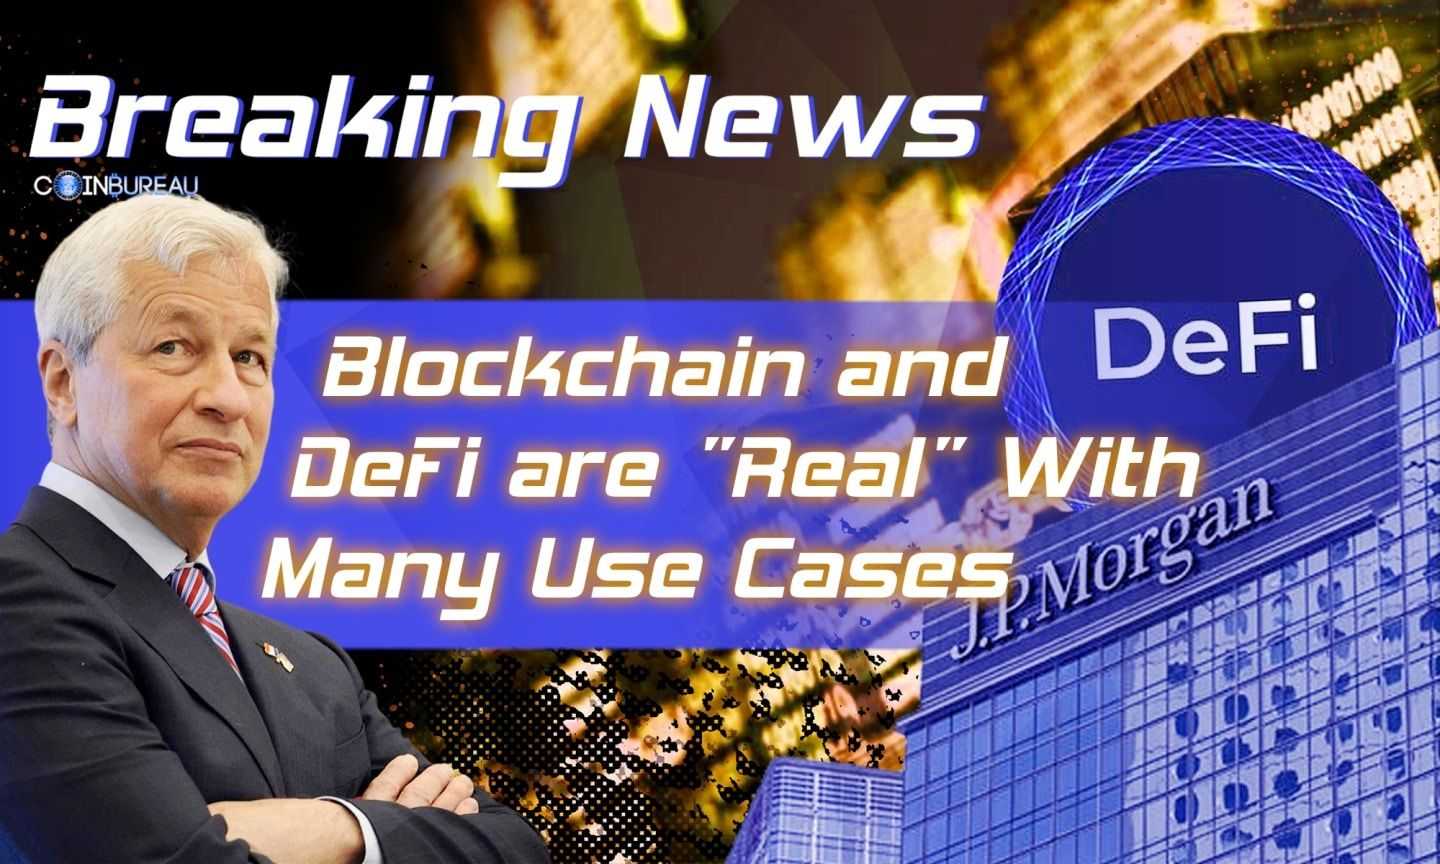 JPMorgan CEO &amp; Crypto Skeptic Jamie Dimon Admits Blockchain and DeFi are “Real" Technologies With Many Use Cases